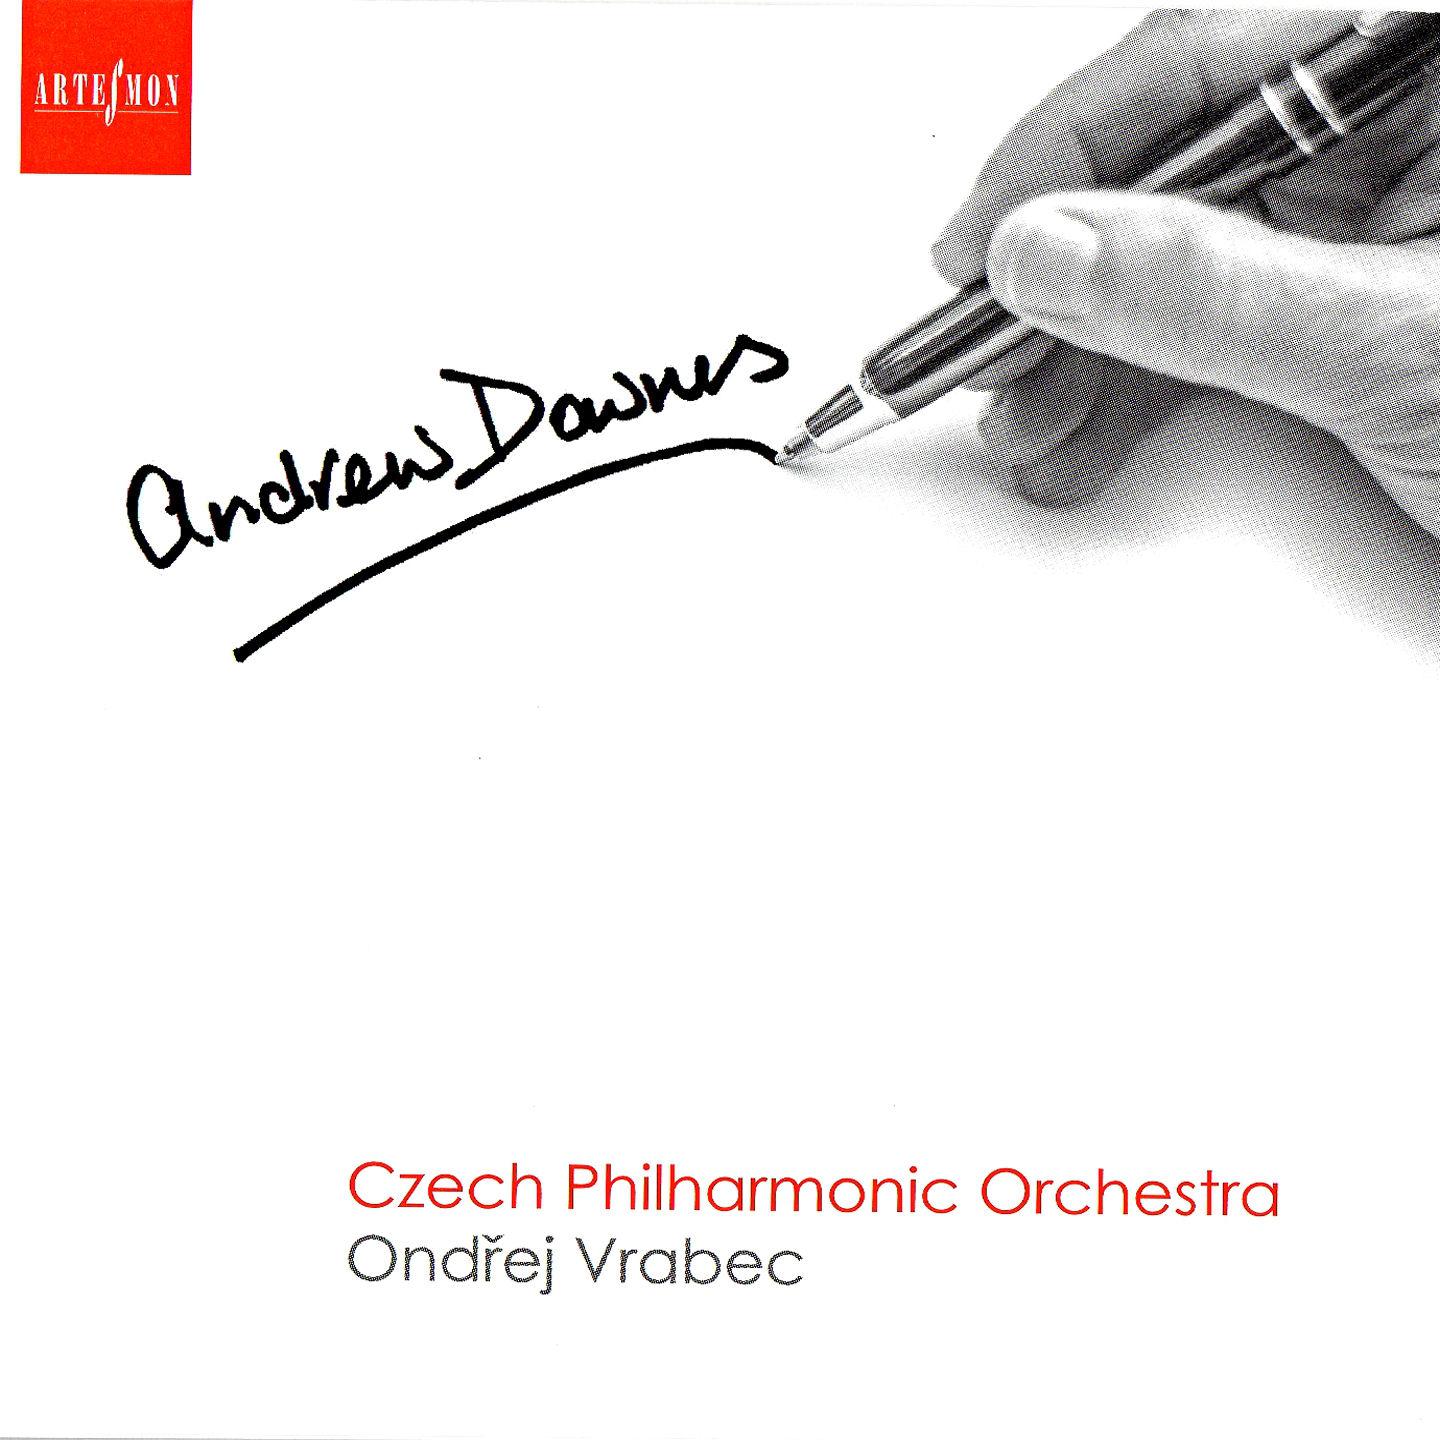 Symphony No. 2 for Chamber Orchestra, Op. 30: III. Largo